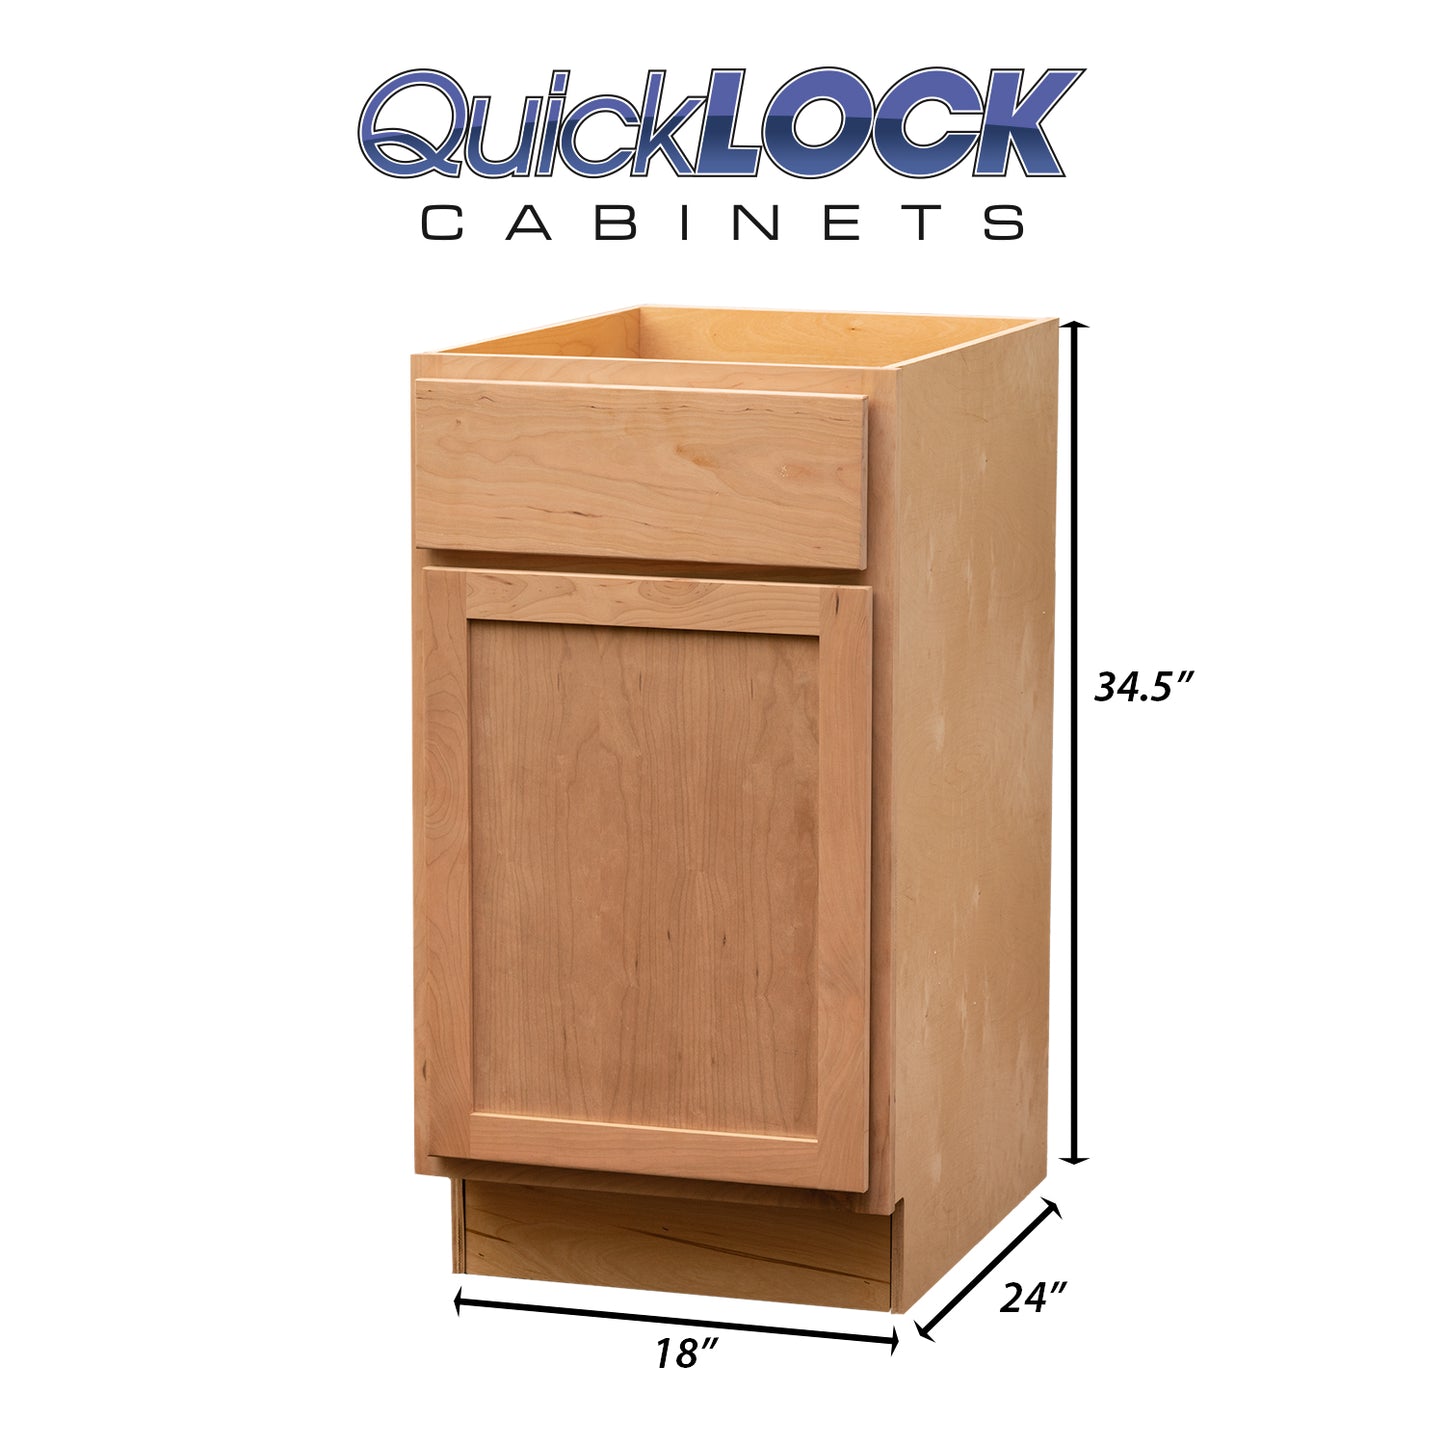 Quicklock RTA (Ready-to-Assemble) Raw Cherry Base Cabinet- 18", 21", 24" Width